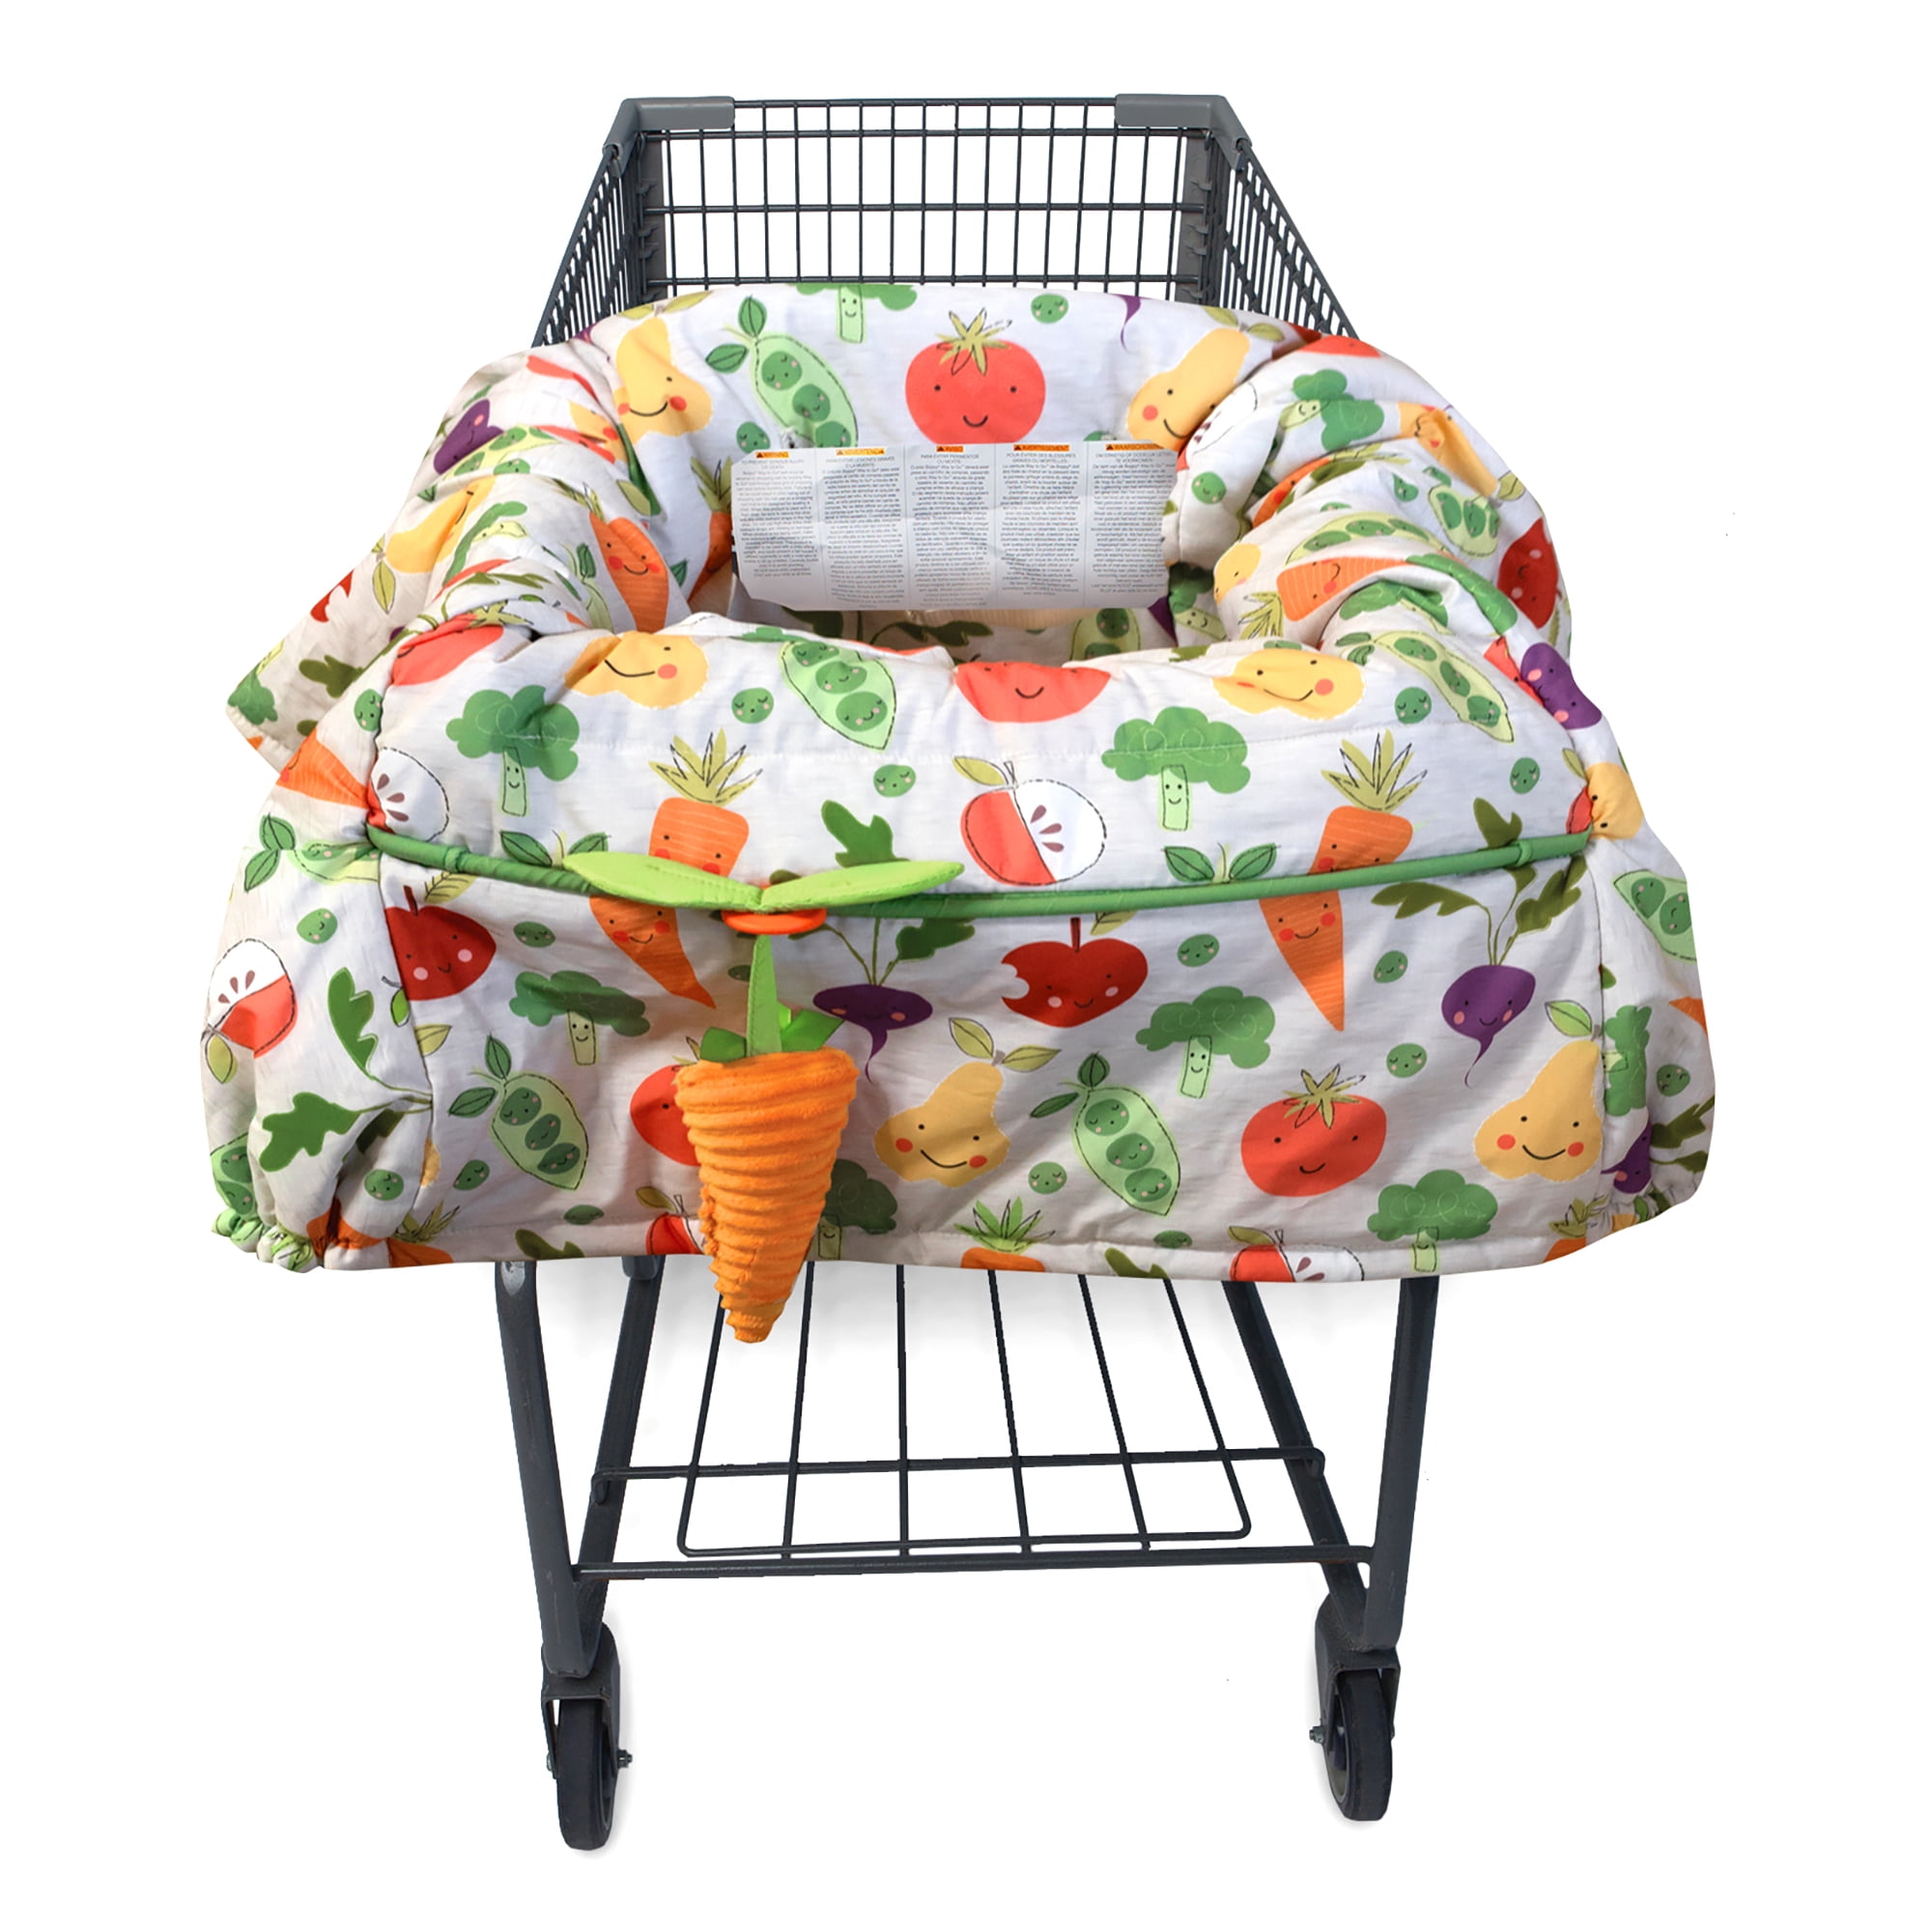 Portable Shopping Cart Chair Cover Trolley Soft Pad Baby Seat Cove 